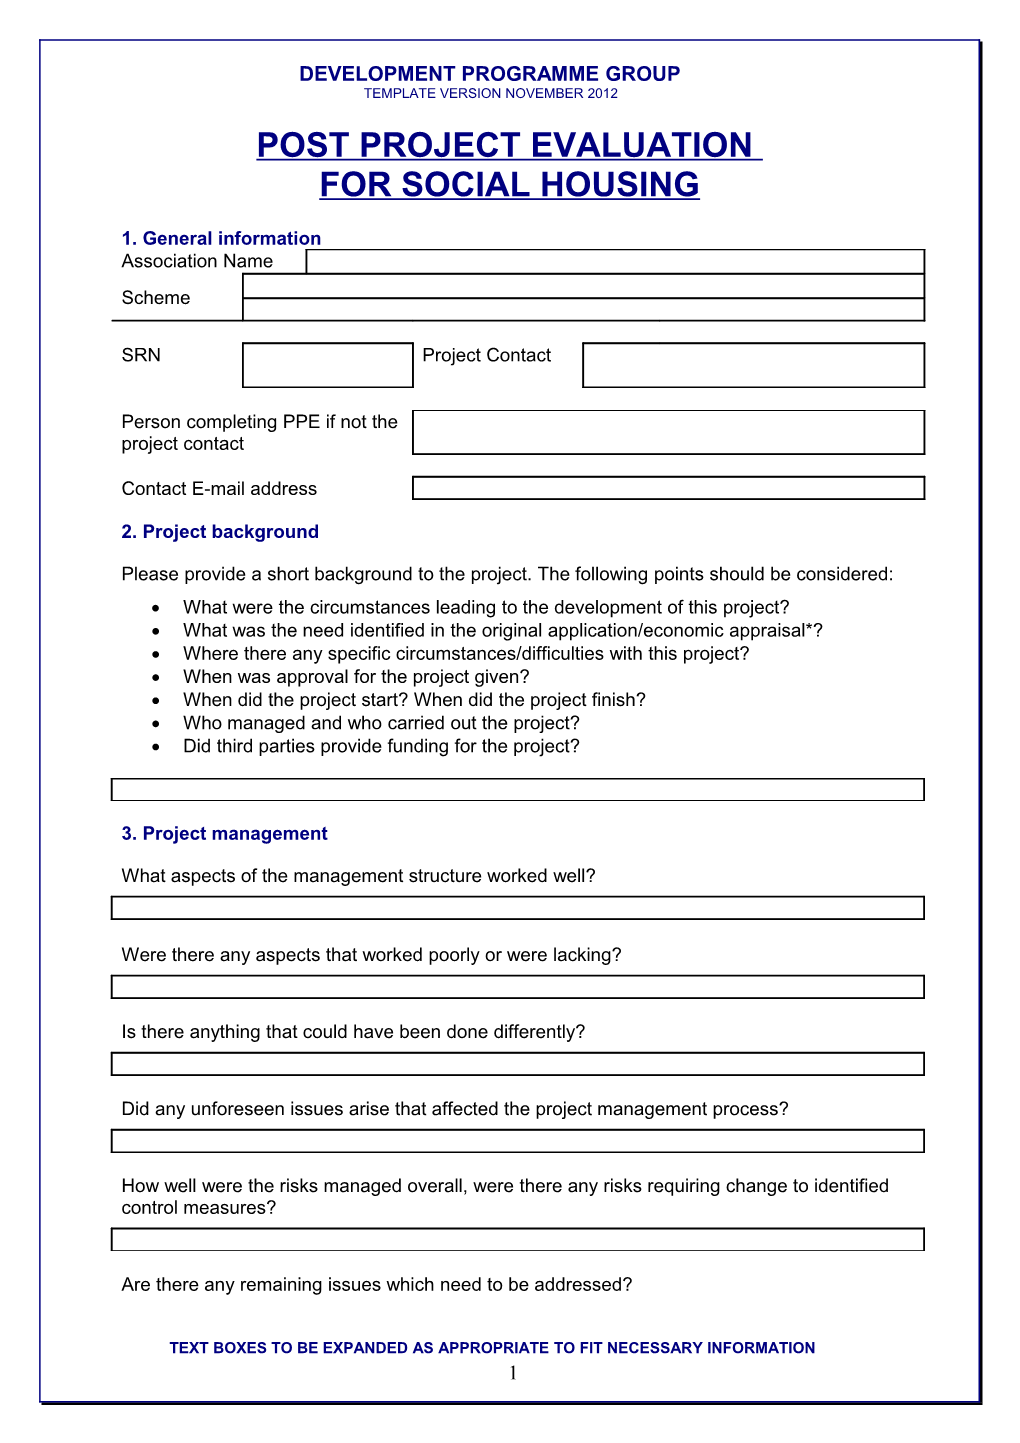 Post Project Evaluation Form for Social Housing